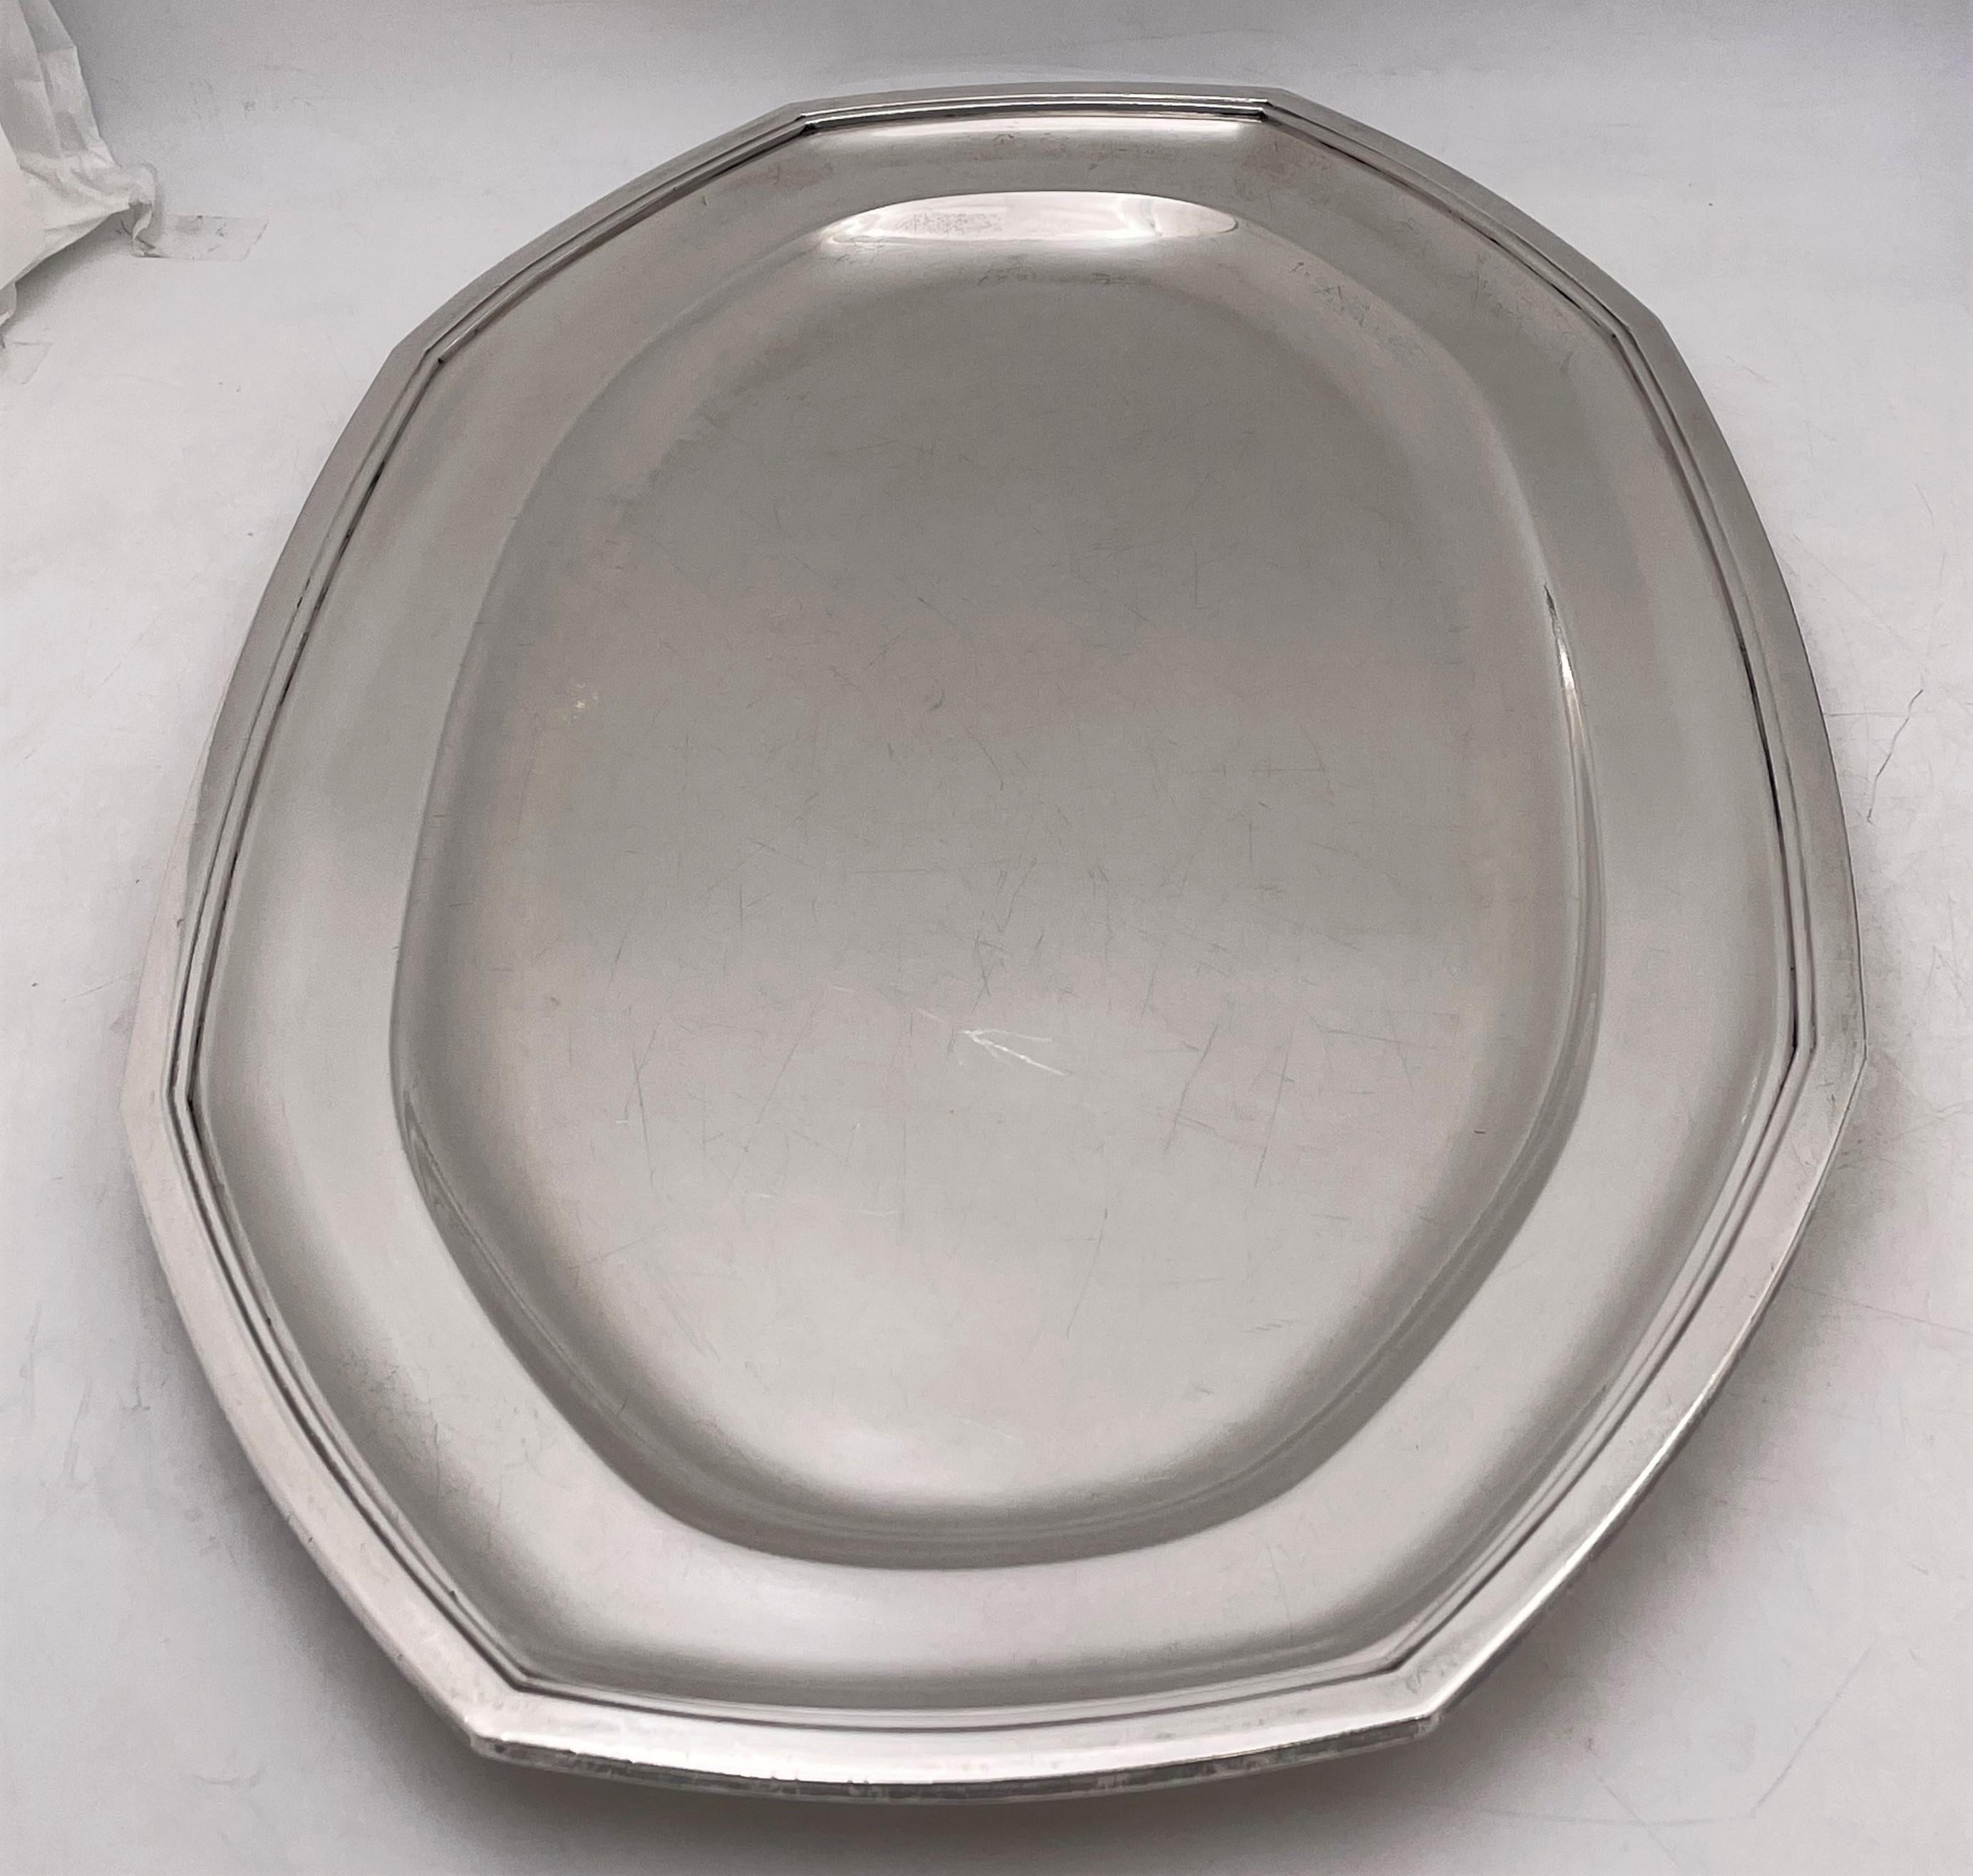 Wolfers, Belgian silver platter or tray, from the early 20th century, in Art Deco style with beautiful geometric accents and design. It measures 19 2/3'' in length by 12 1/8'' in width by 1'' in height, weighs 44.9 troy ounces, and bears hallmarks